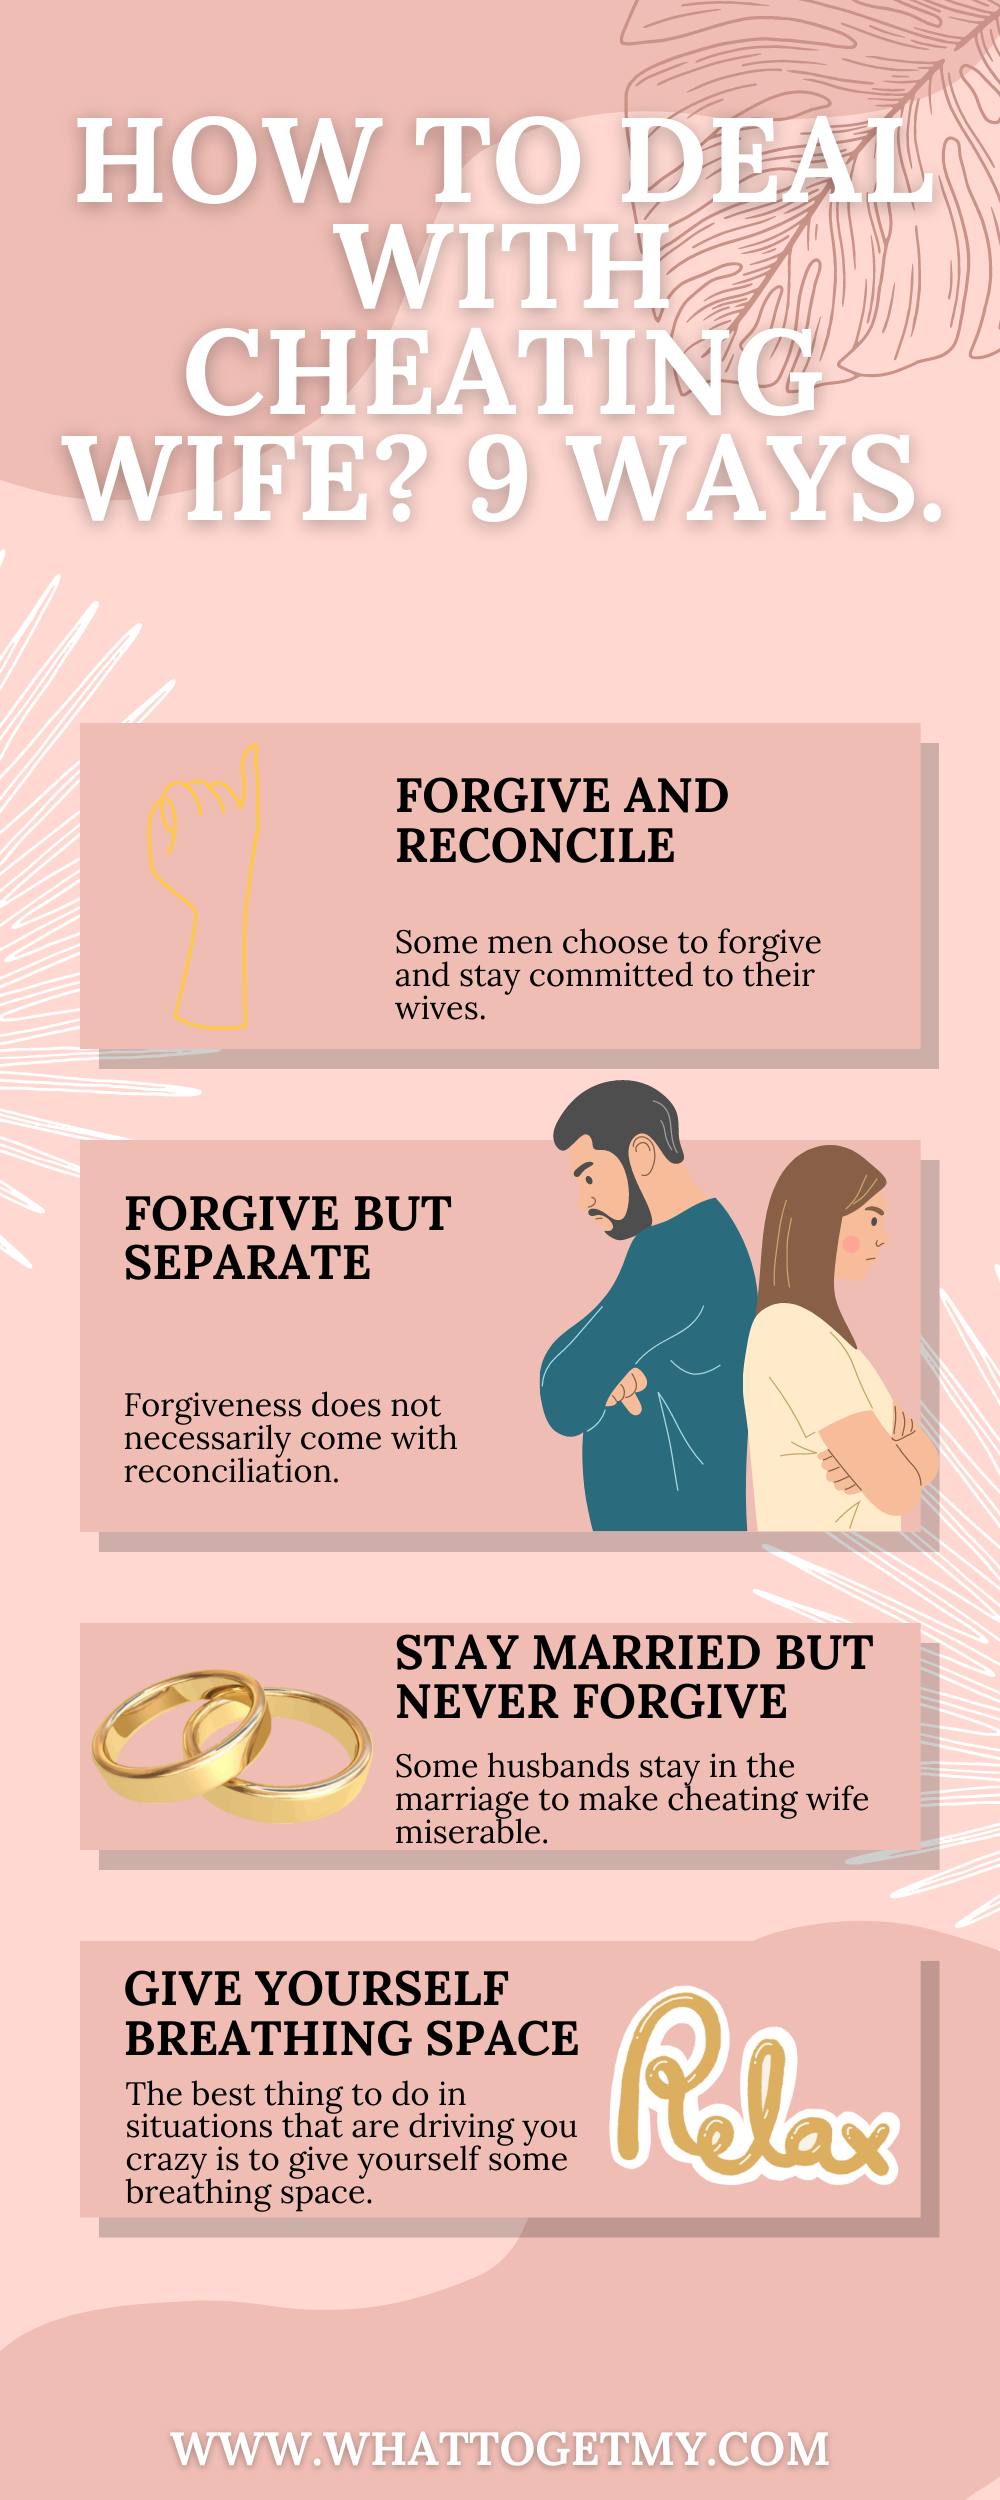 How to deal with cheating wife 9 ways.